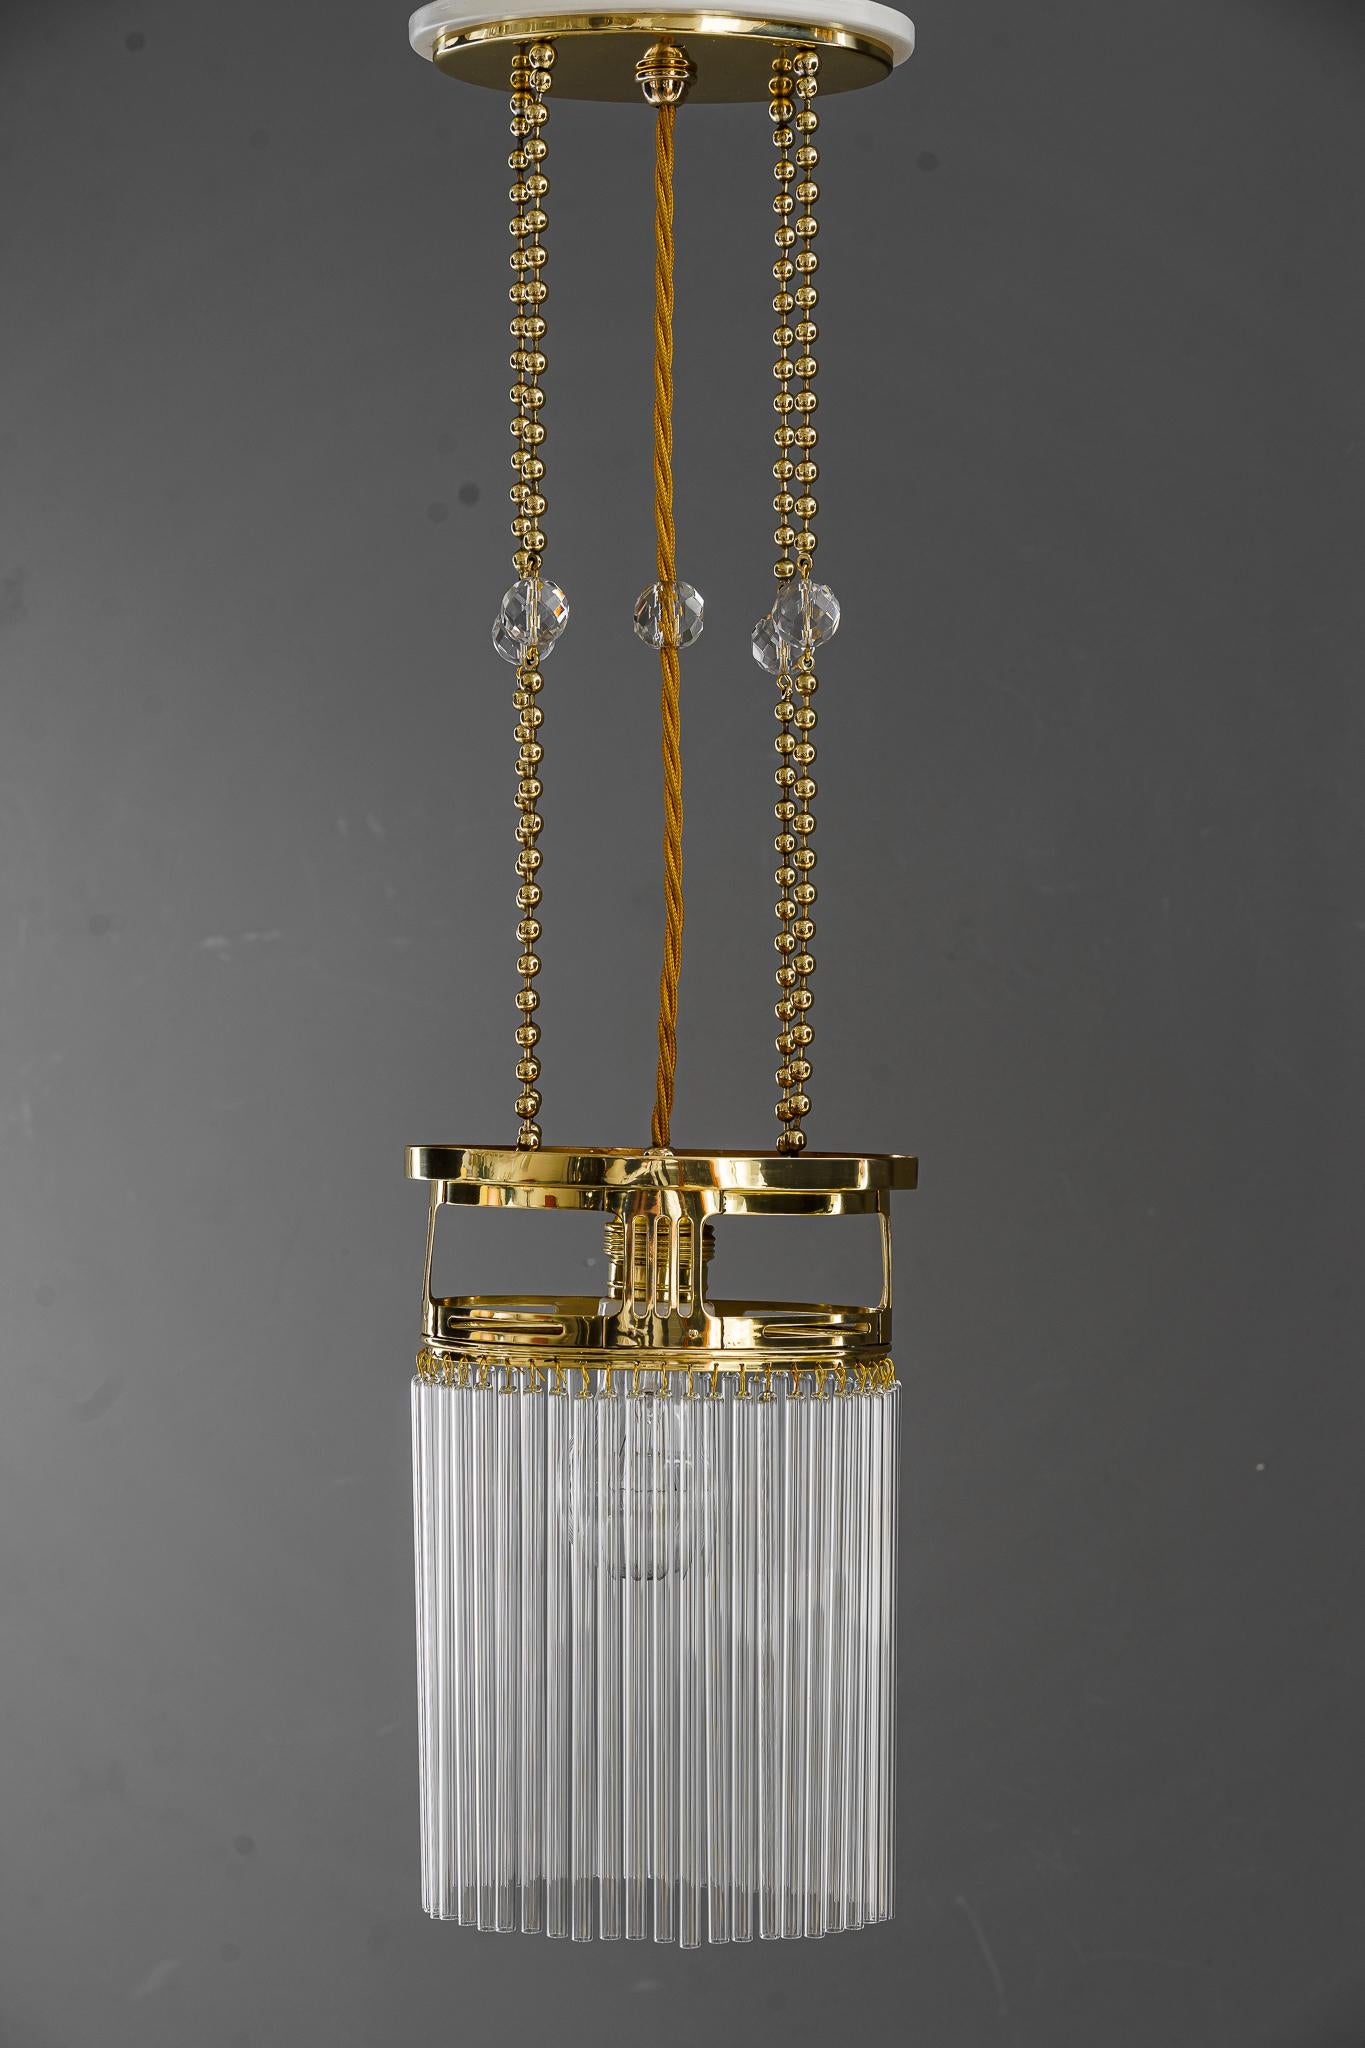 Art Deco pendant with glass sticks Vienna, around 1920s.
Brass polished and stove enameled.